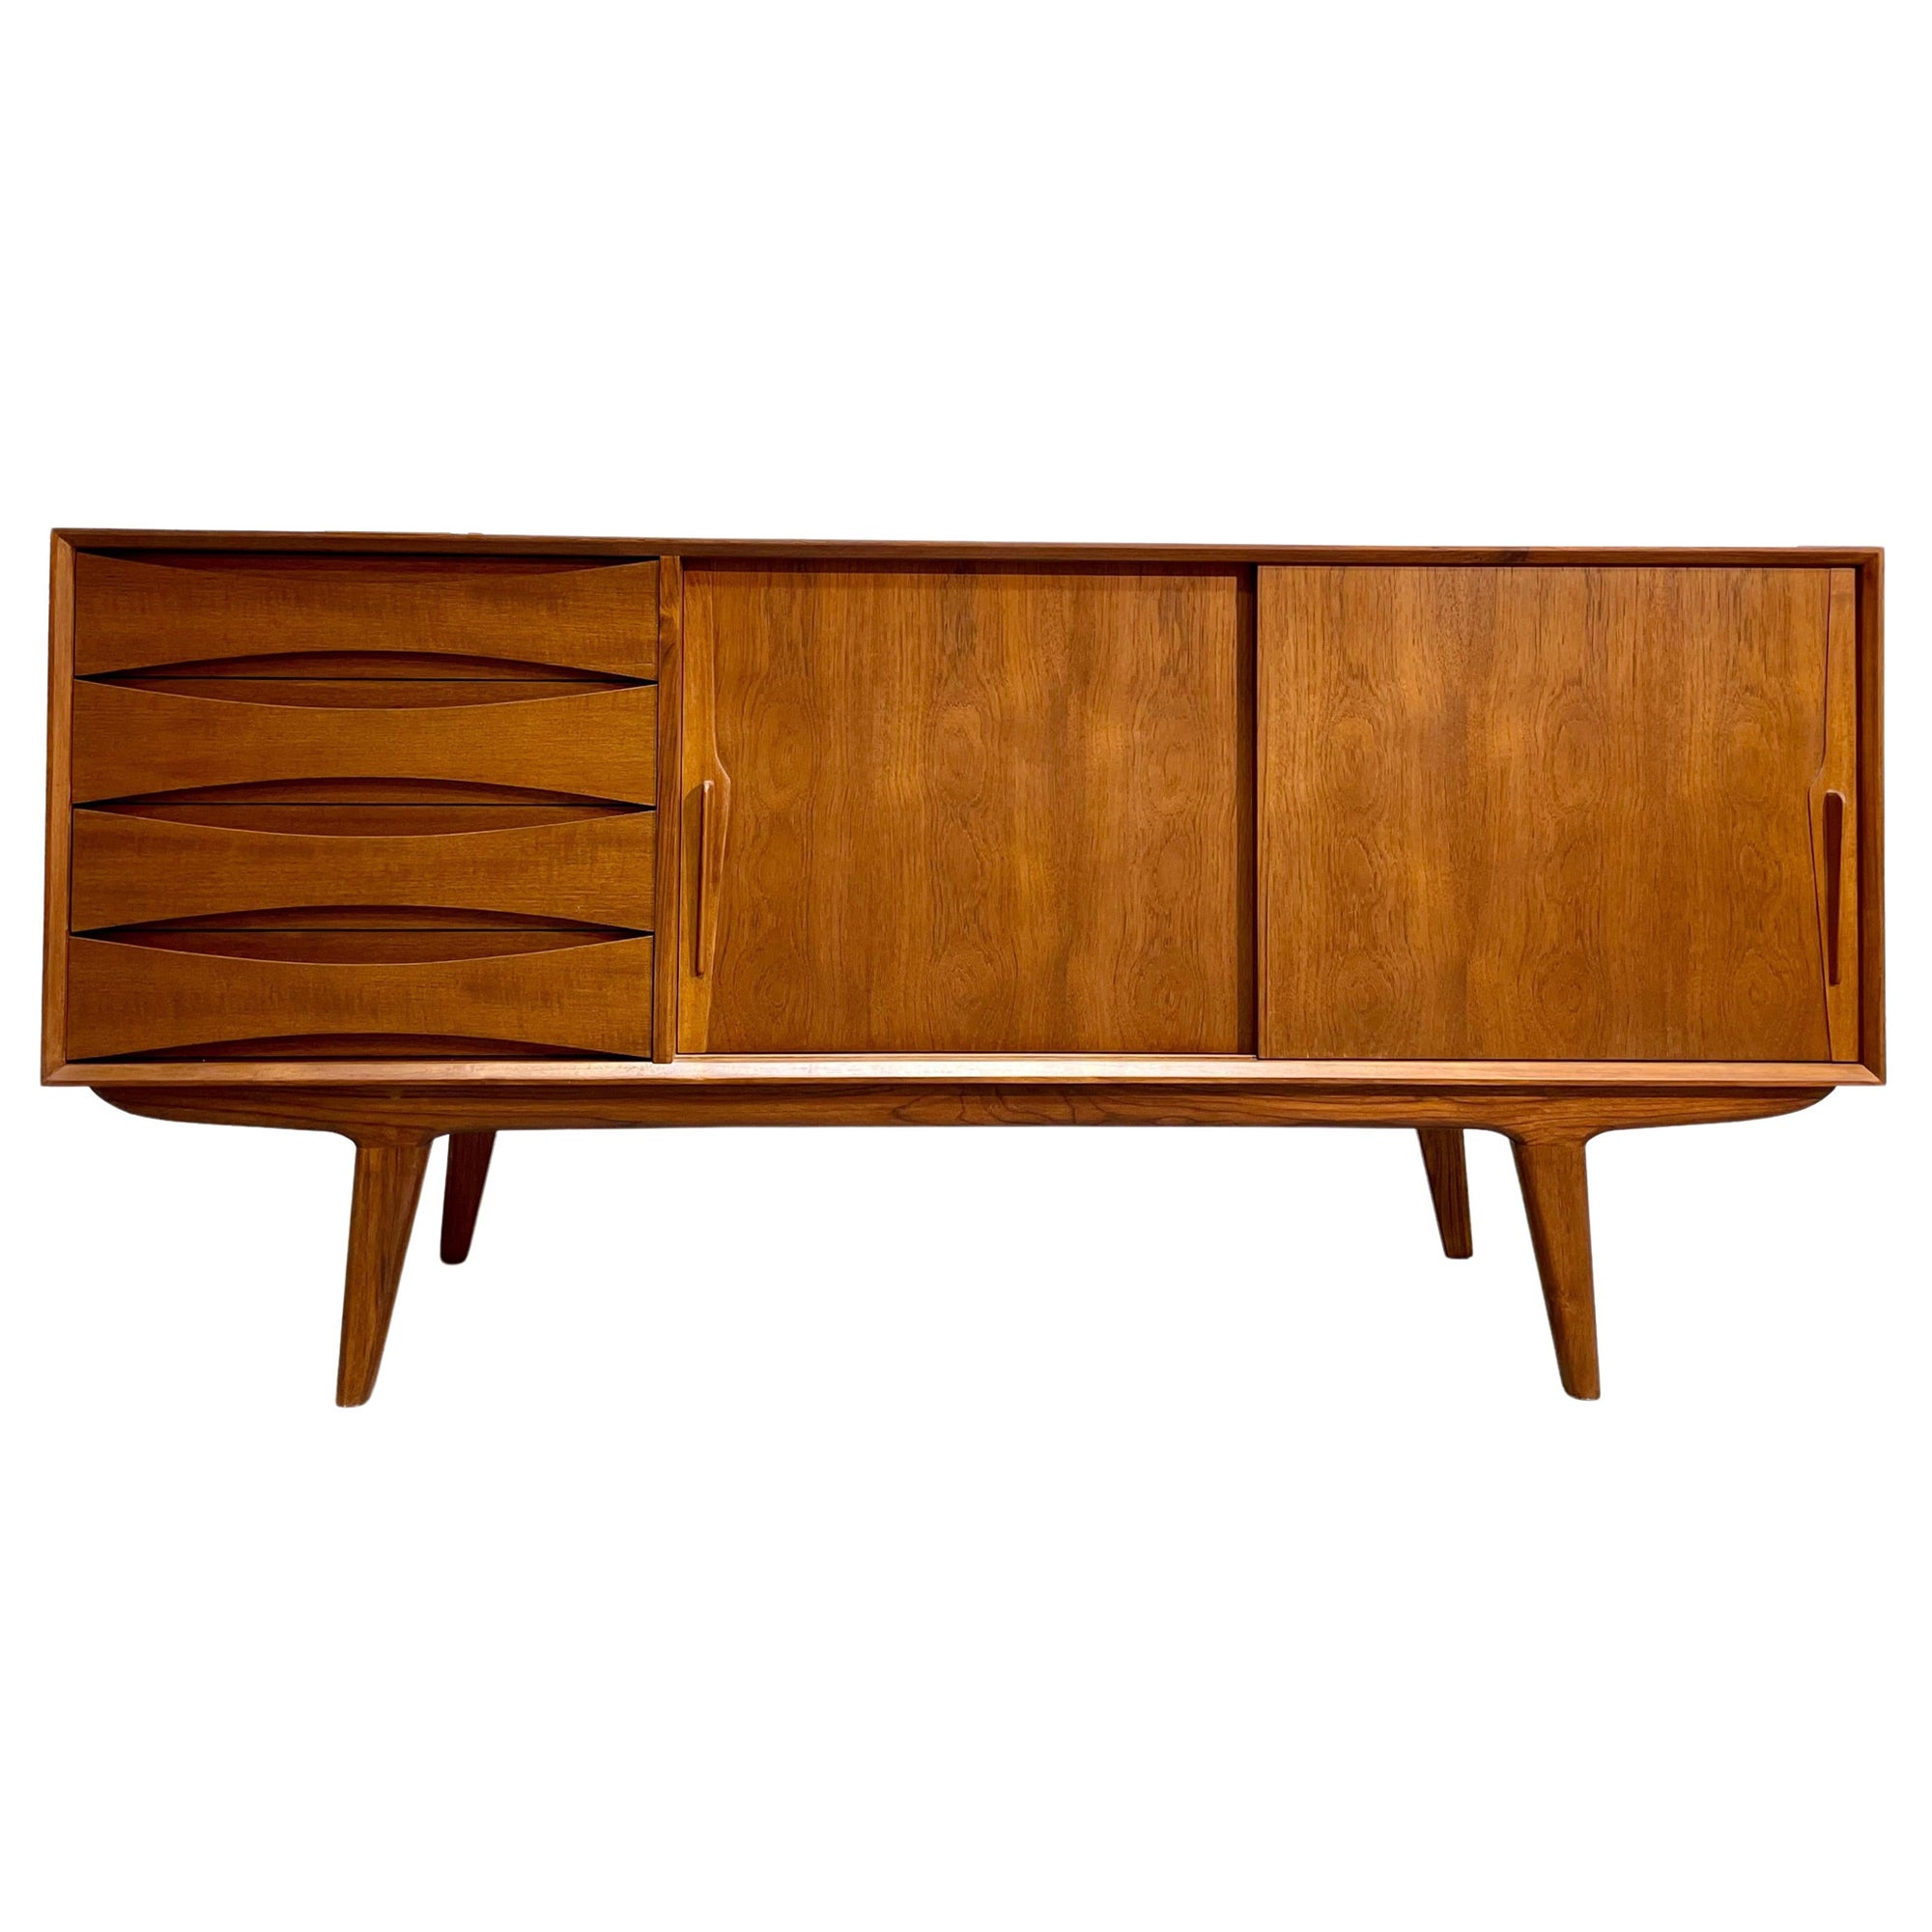  Handsome Mid Century MODERN styled SIDEBOARD / CREDENZA media stand